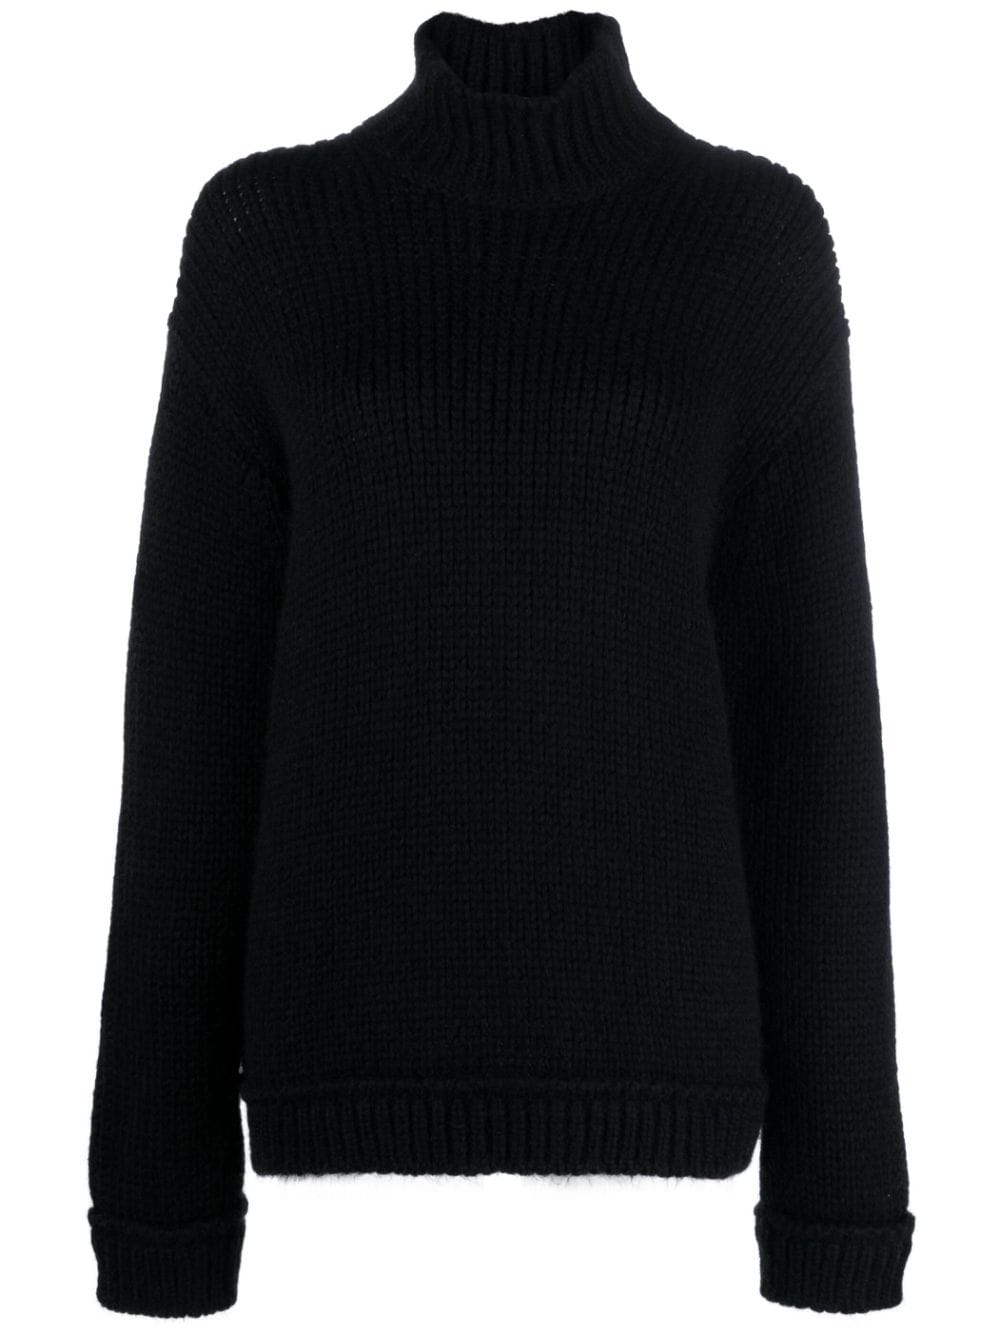 TOM FORD roll-neck knitted sweater - Black von TOM FORD